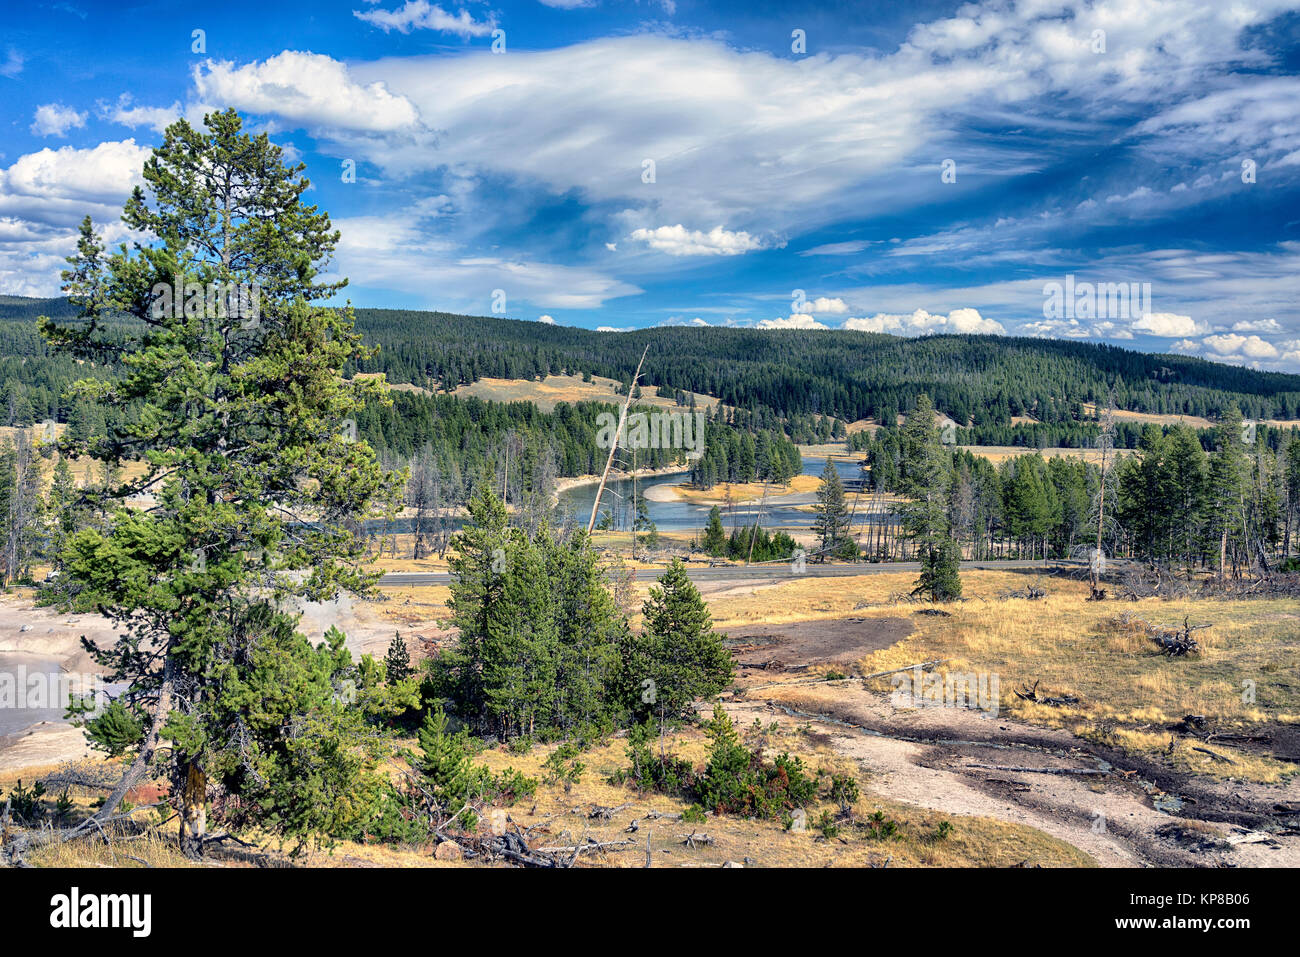 Zone thermique Yellowstone, Upper Geyser Basin. Wyoming, USA Banque D'Images